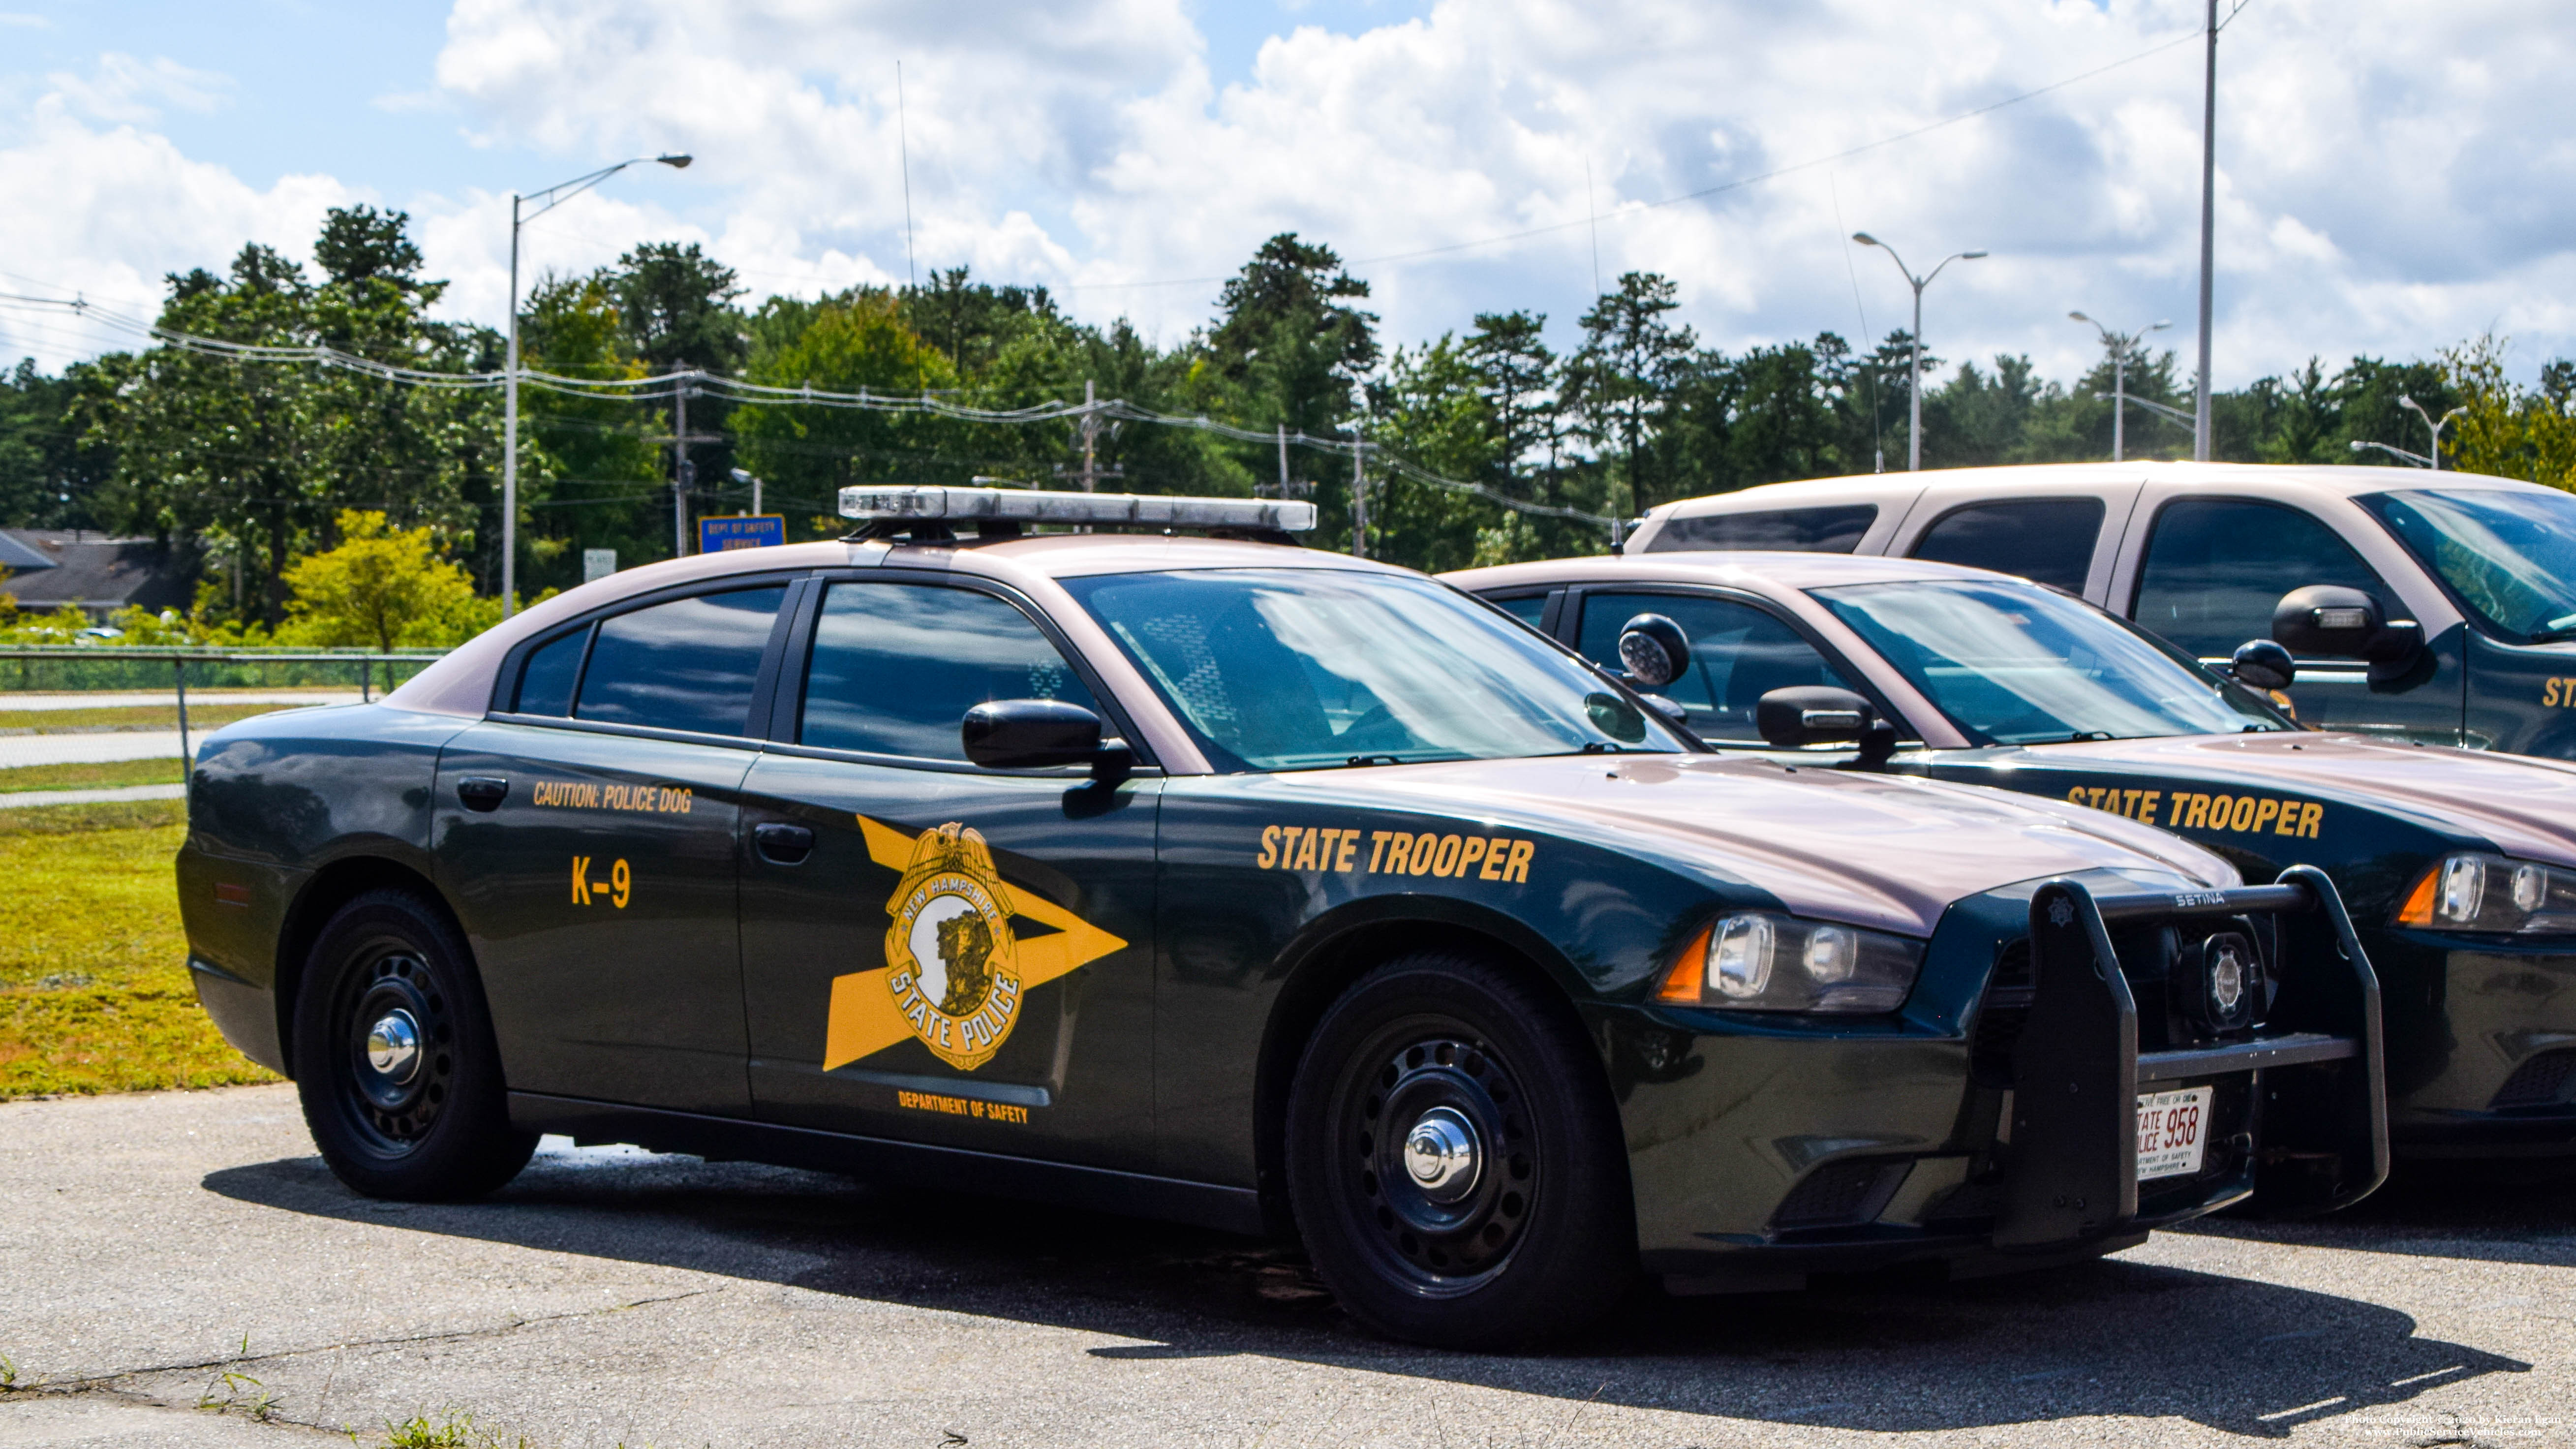 A photo  of New Hampshire State Police
            Cruiser 958, a 2011-2014 Dodge Charger             taken by Kieran Egan